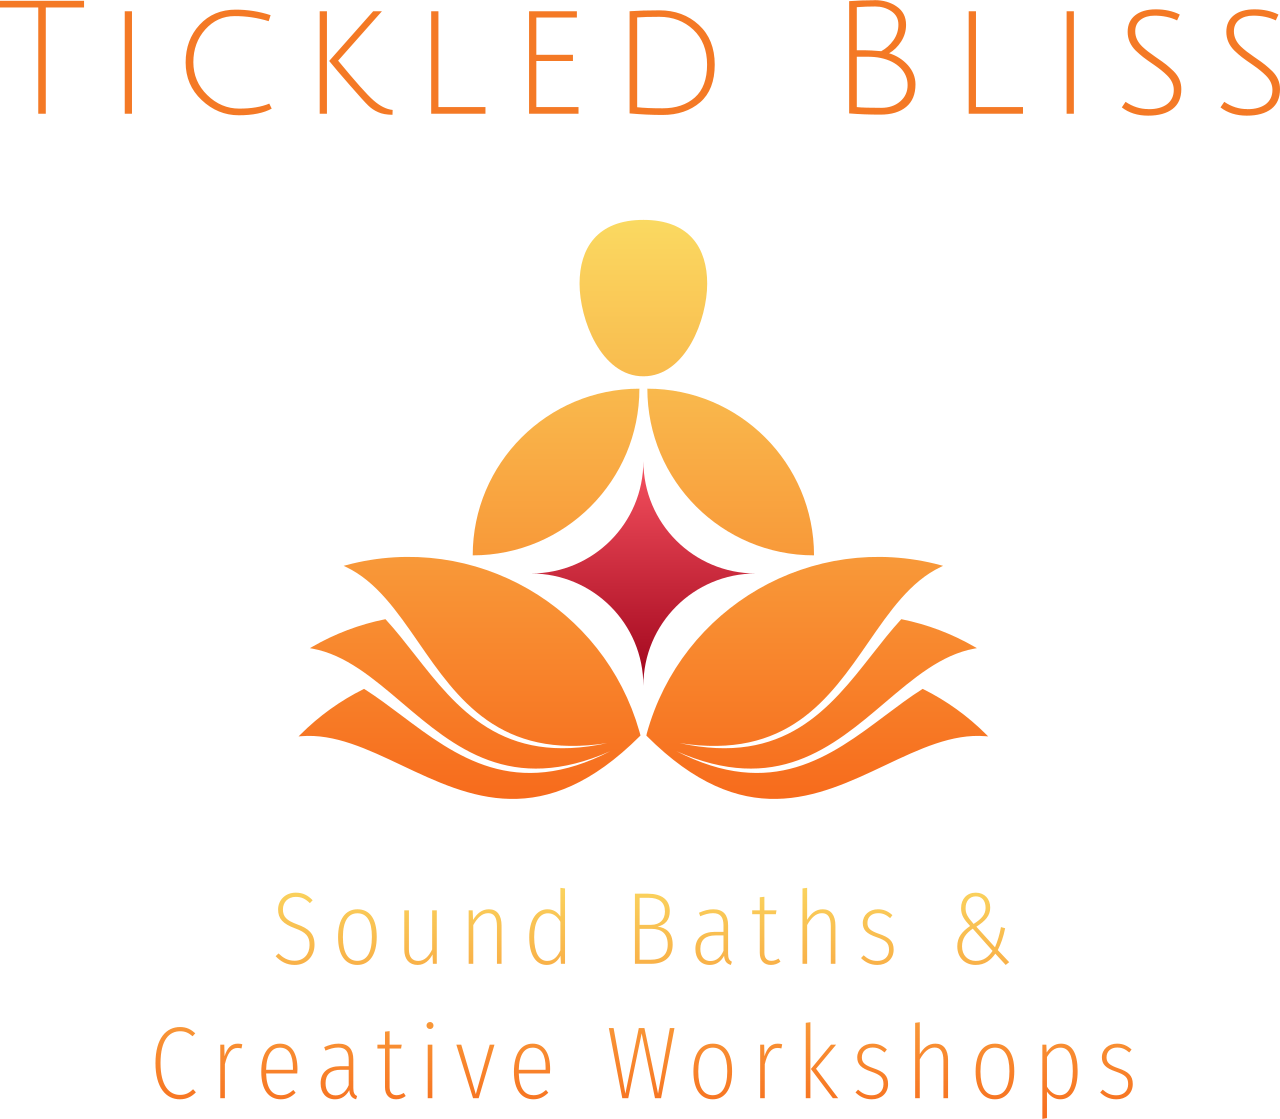 Tickled Bliss's web page